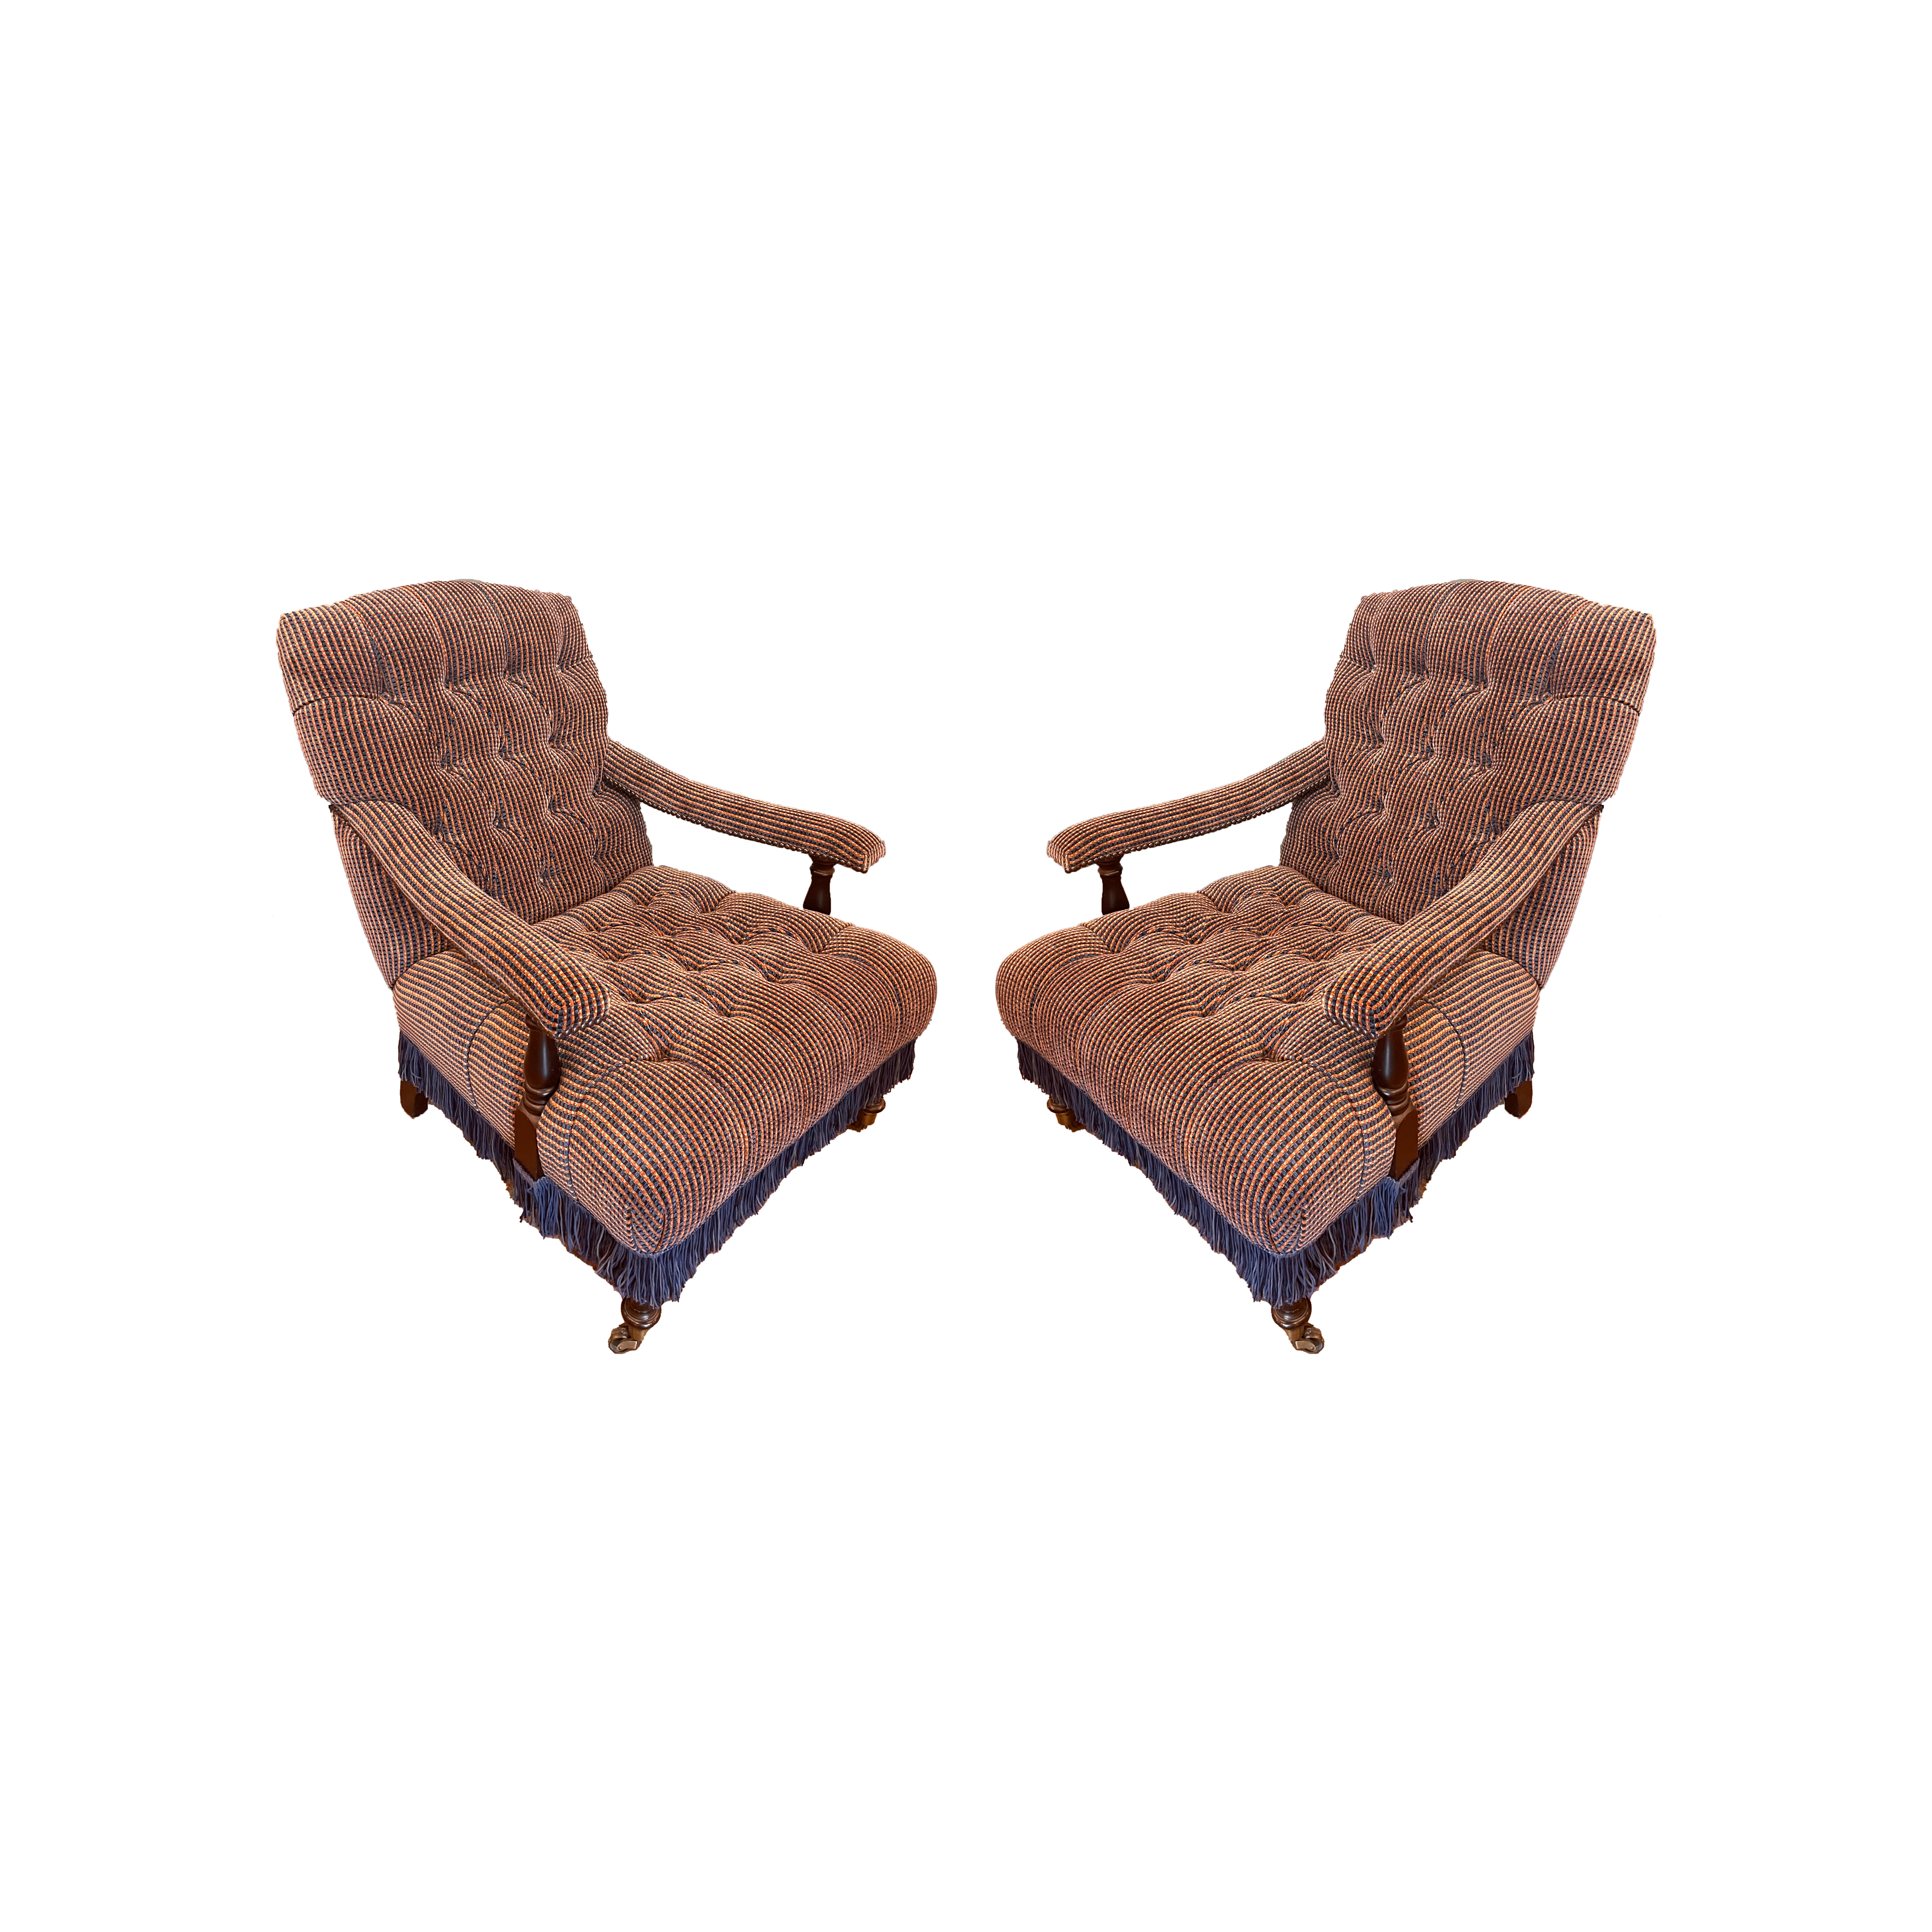 Tufted English Arm Chairs - Pair